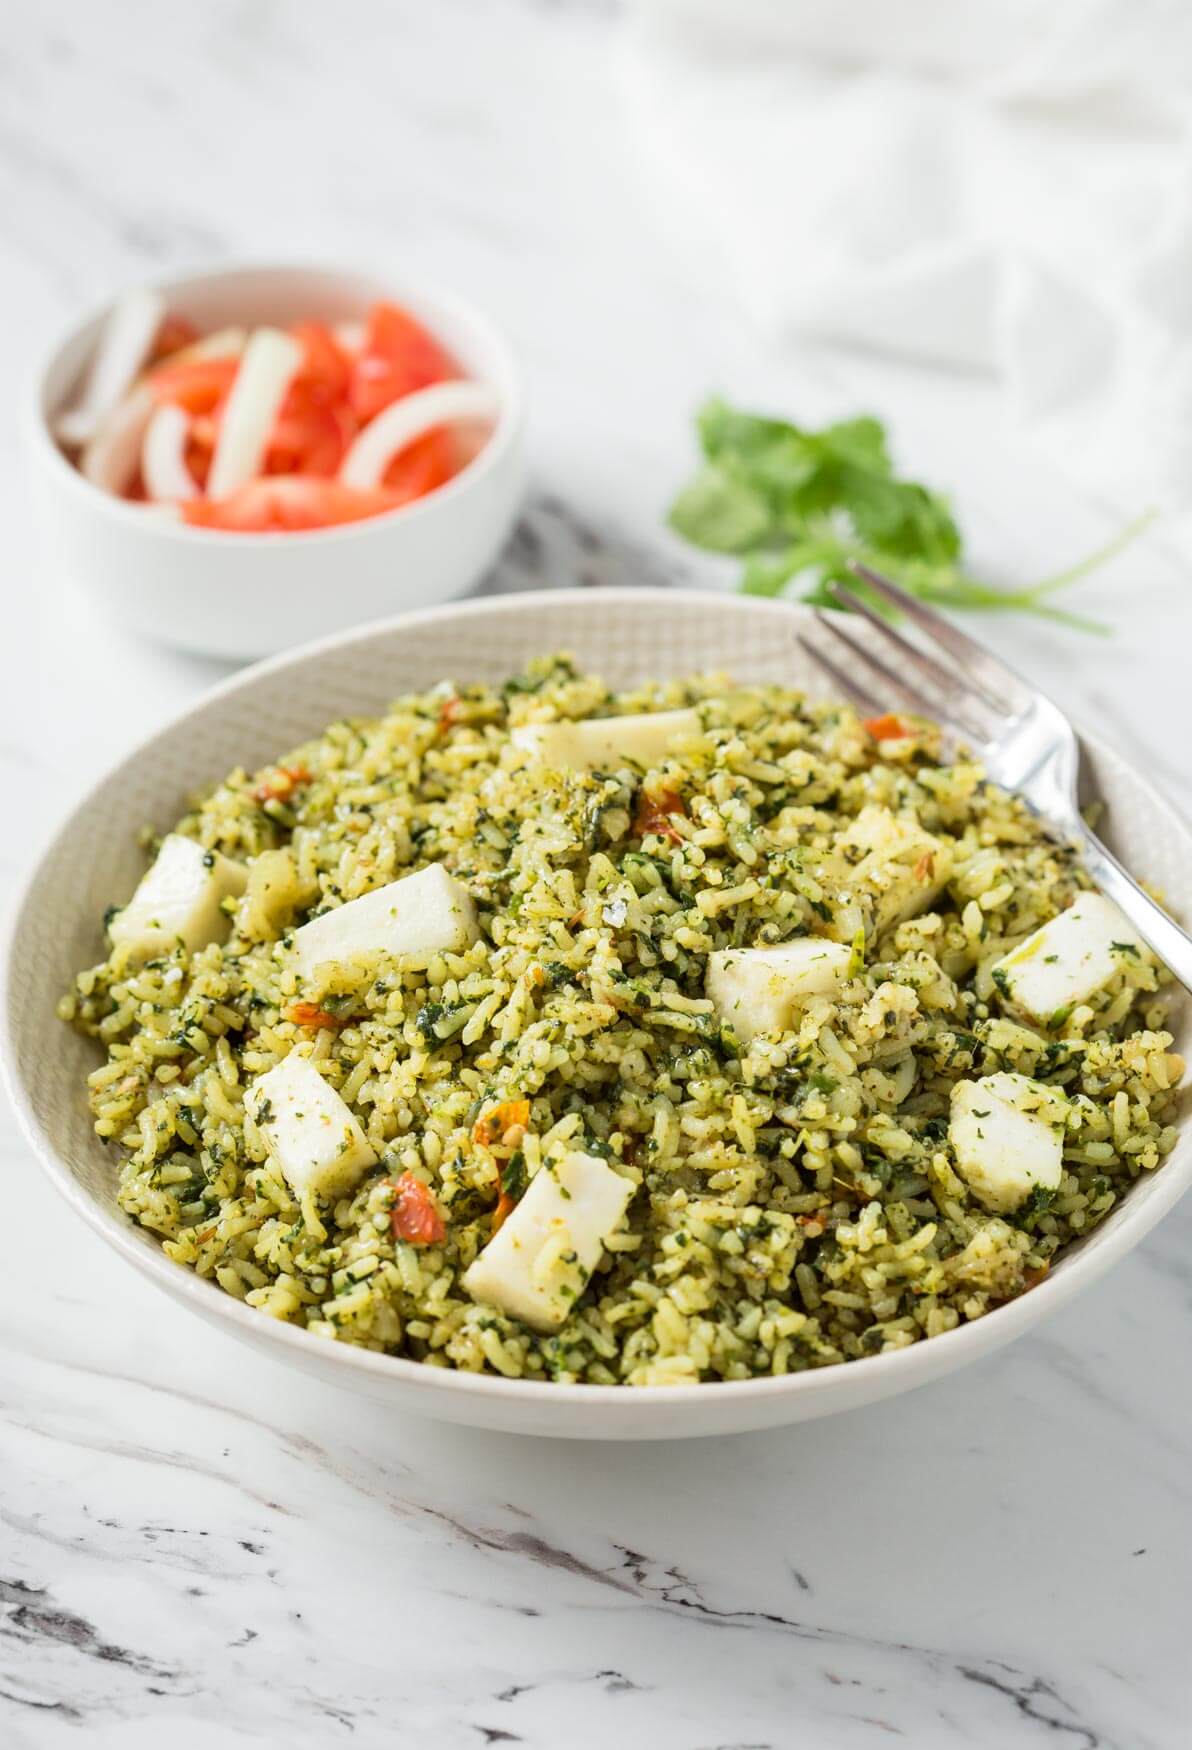 One Pot Easy Palak Paneer Rice or Healthy Spinach Rice | Indian palak paneer turned into one pot rice dish. #spinach #palakpaneer #healthyrecipes